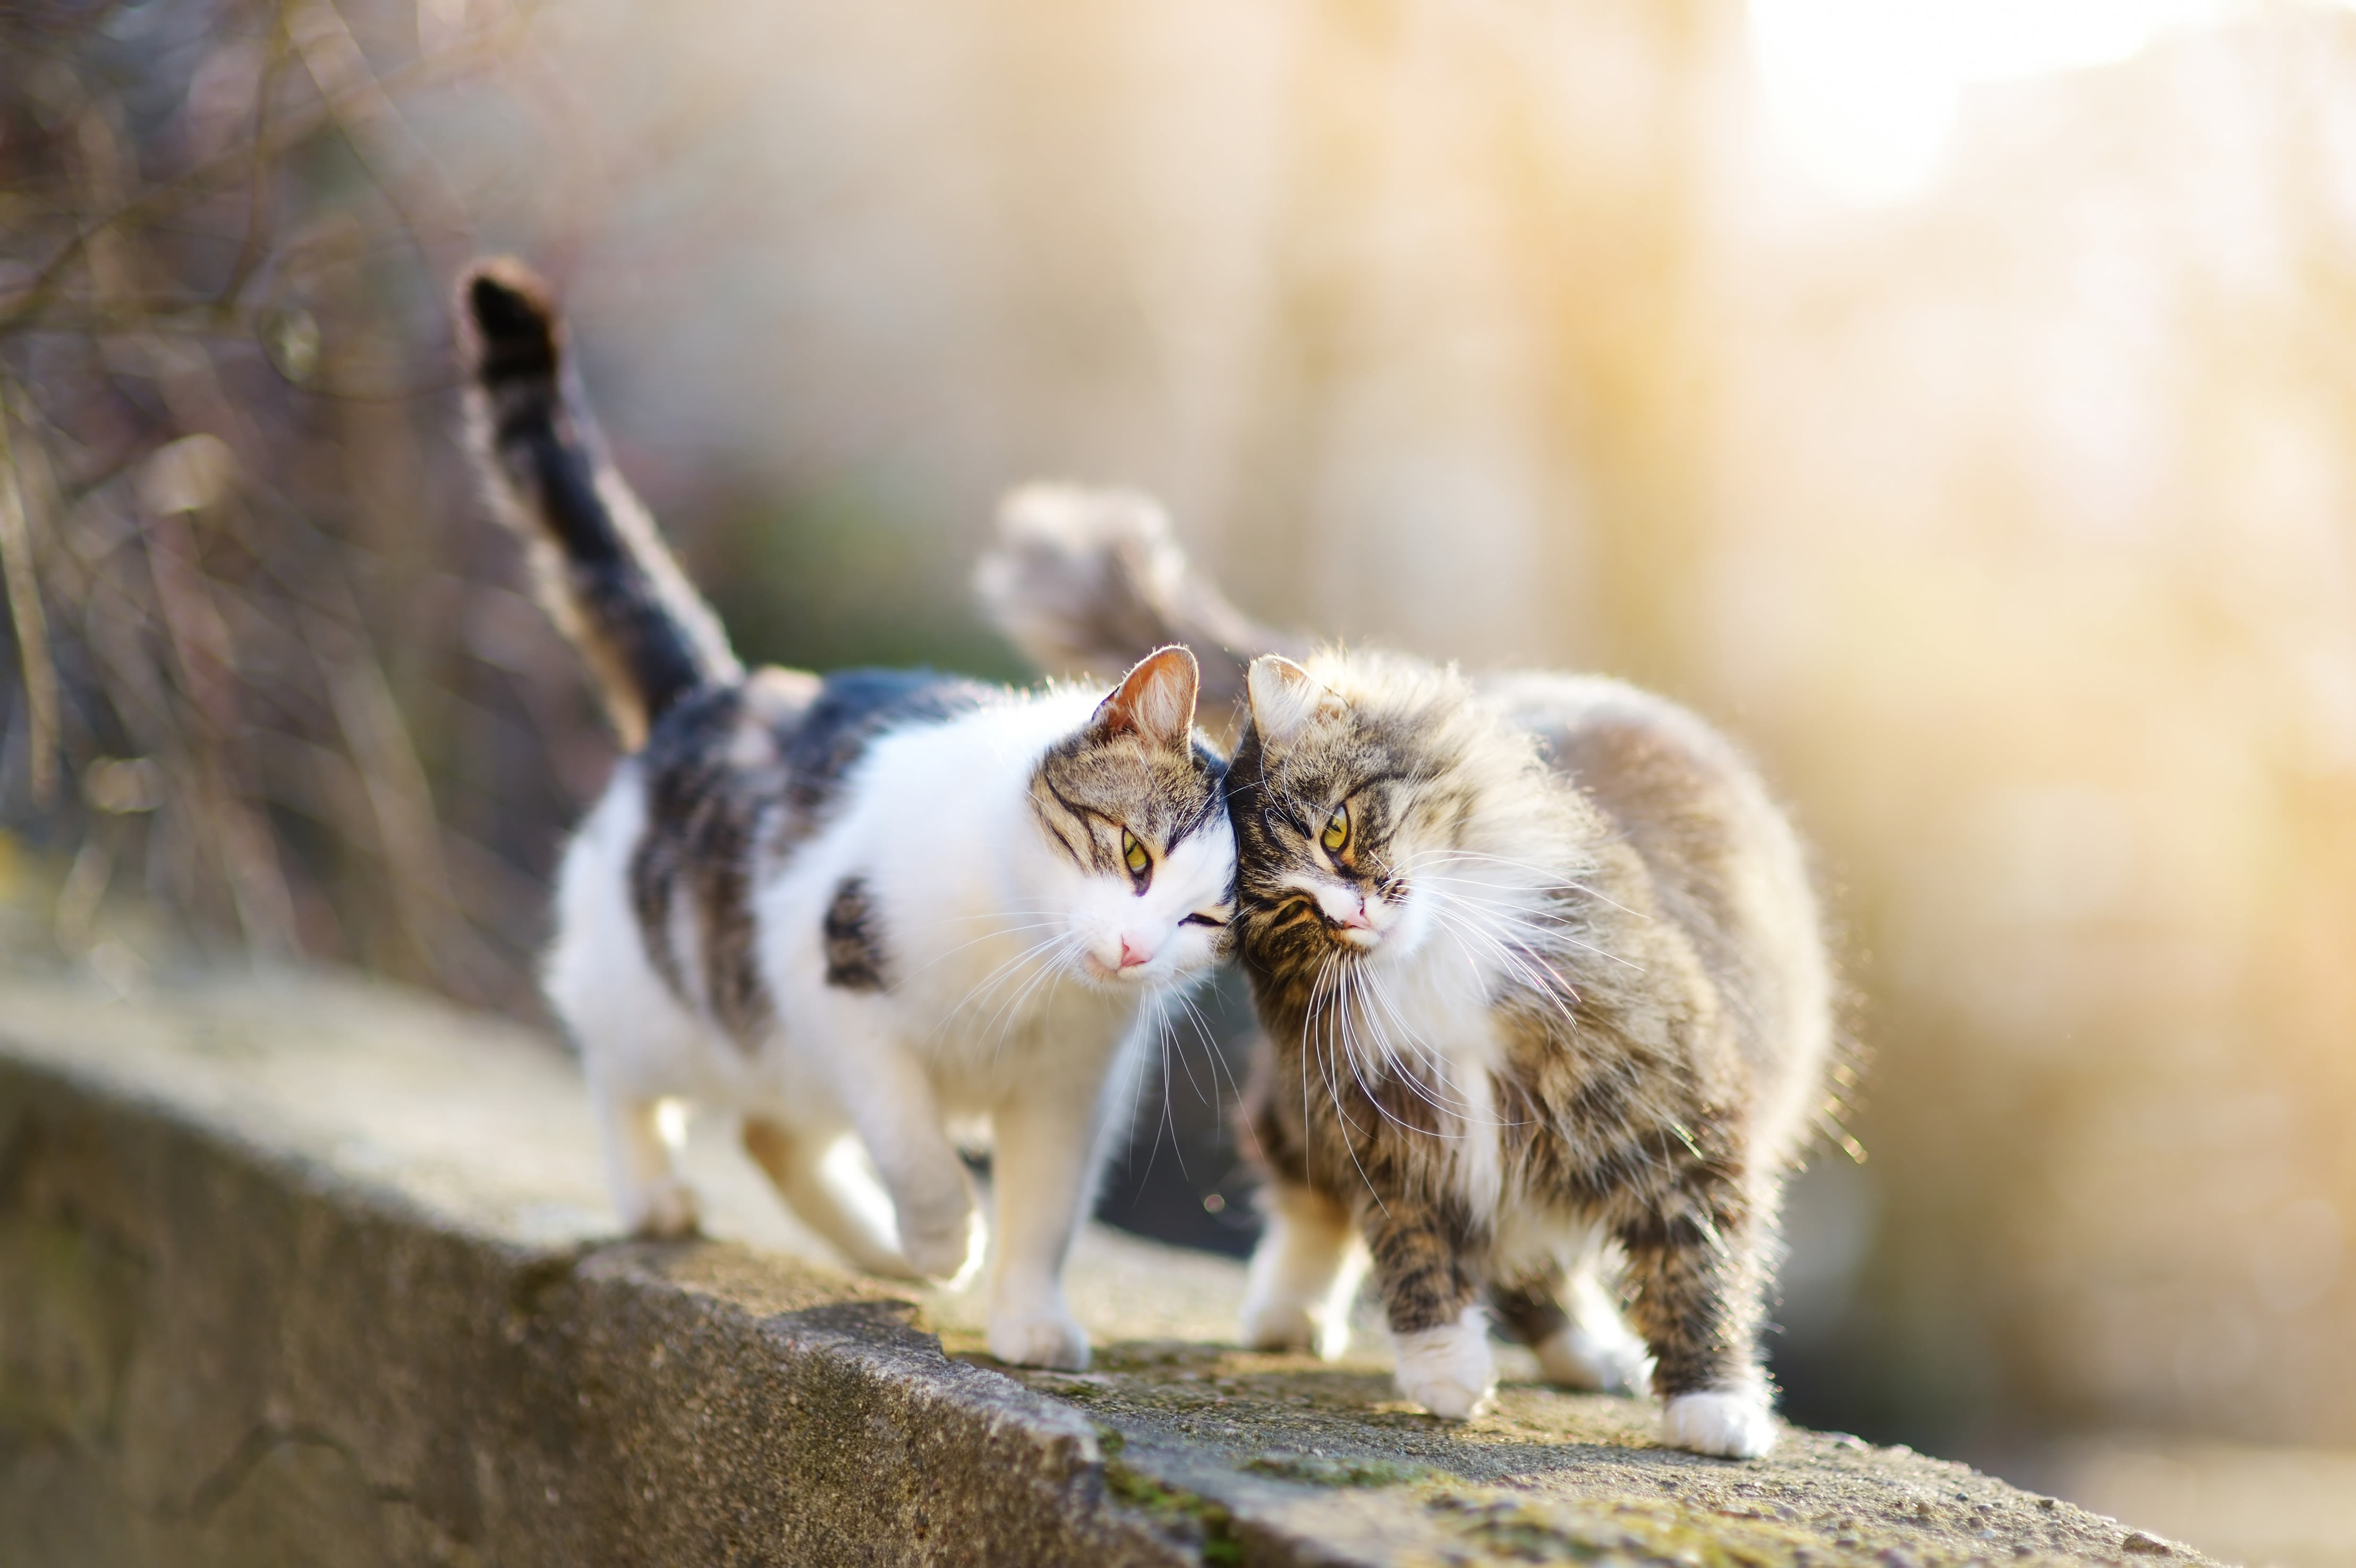 Two happy cats walking together with tails entwined. Help keep your cat healthy with the FVRCP vaccine.